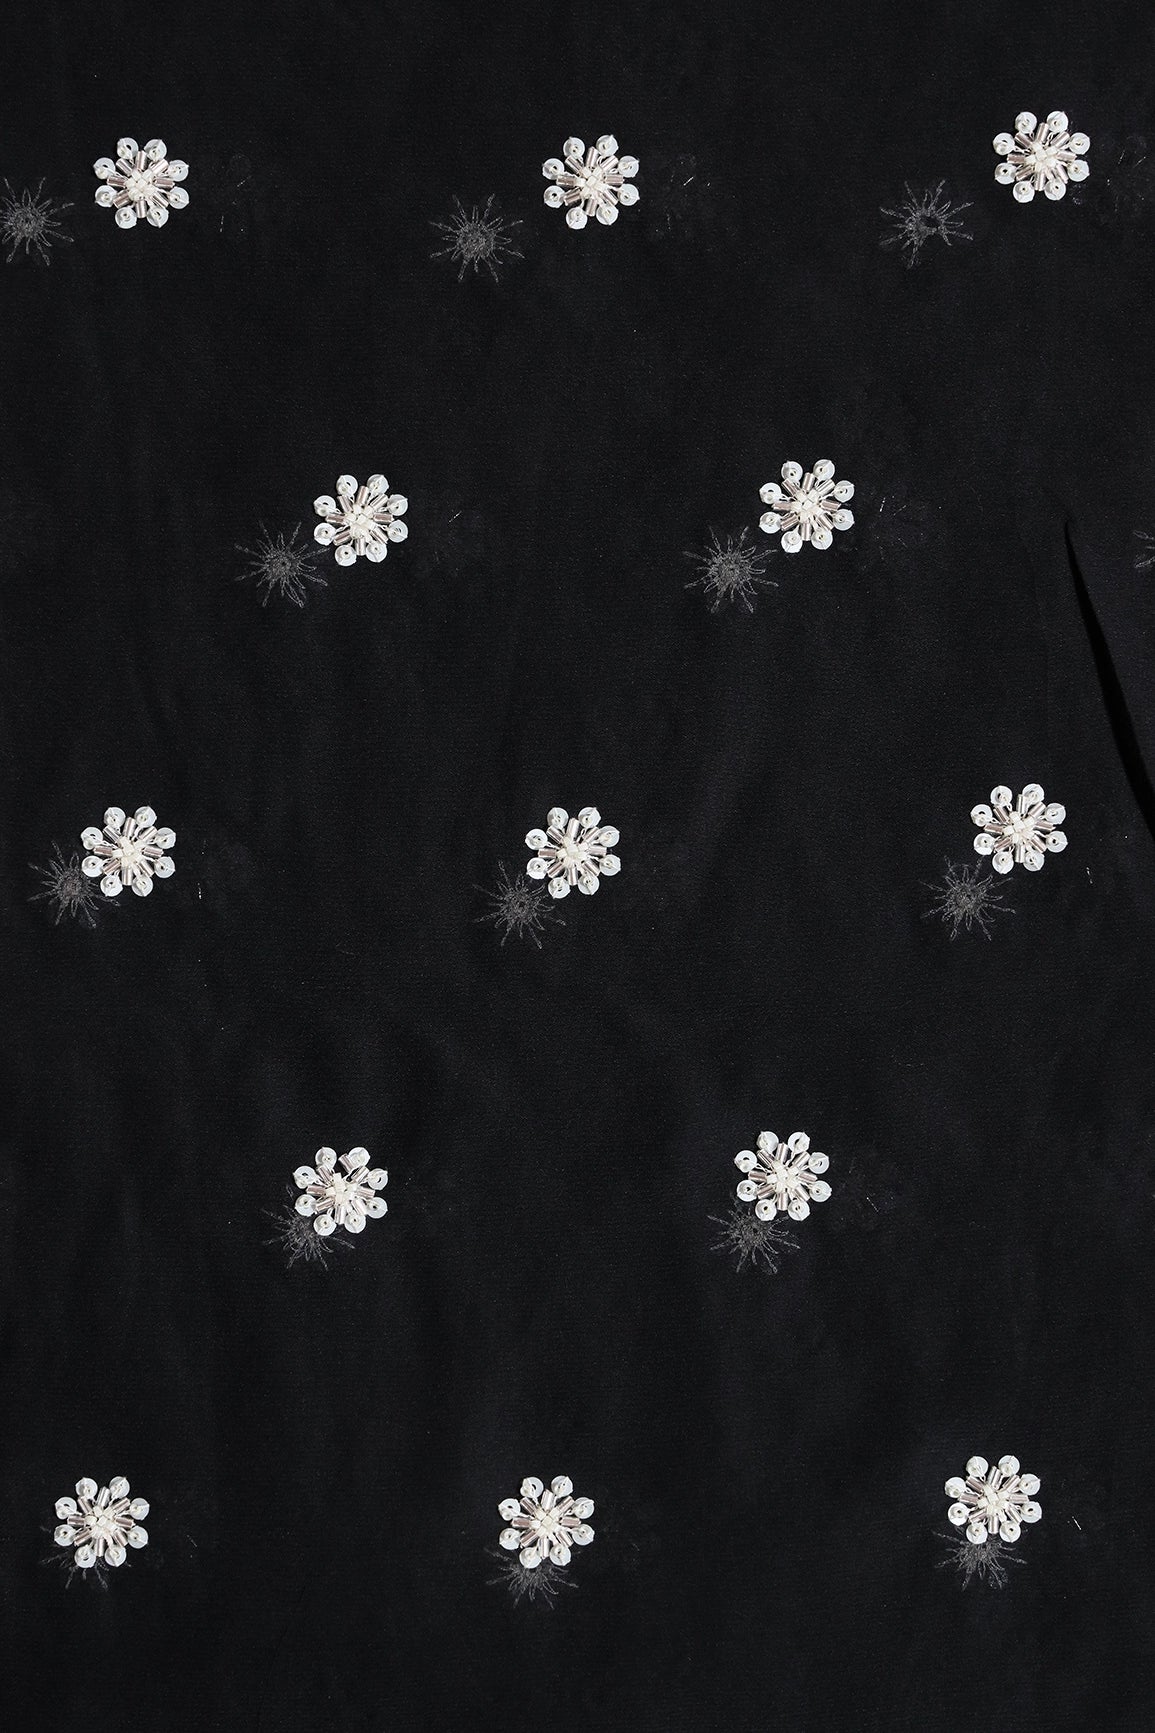 Silver Beads With Sequins Small Floral Handwork Embroidery On Black Viscose Georgette Fabric